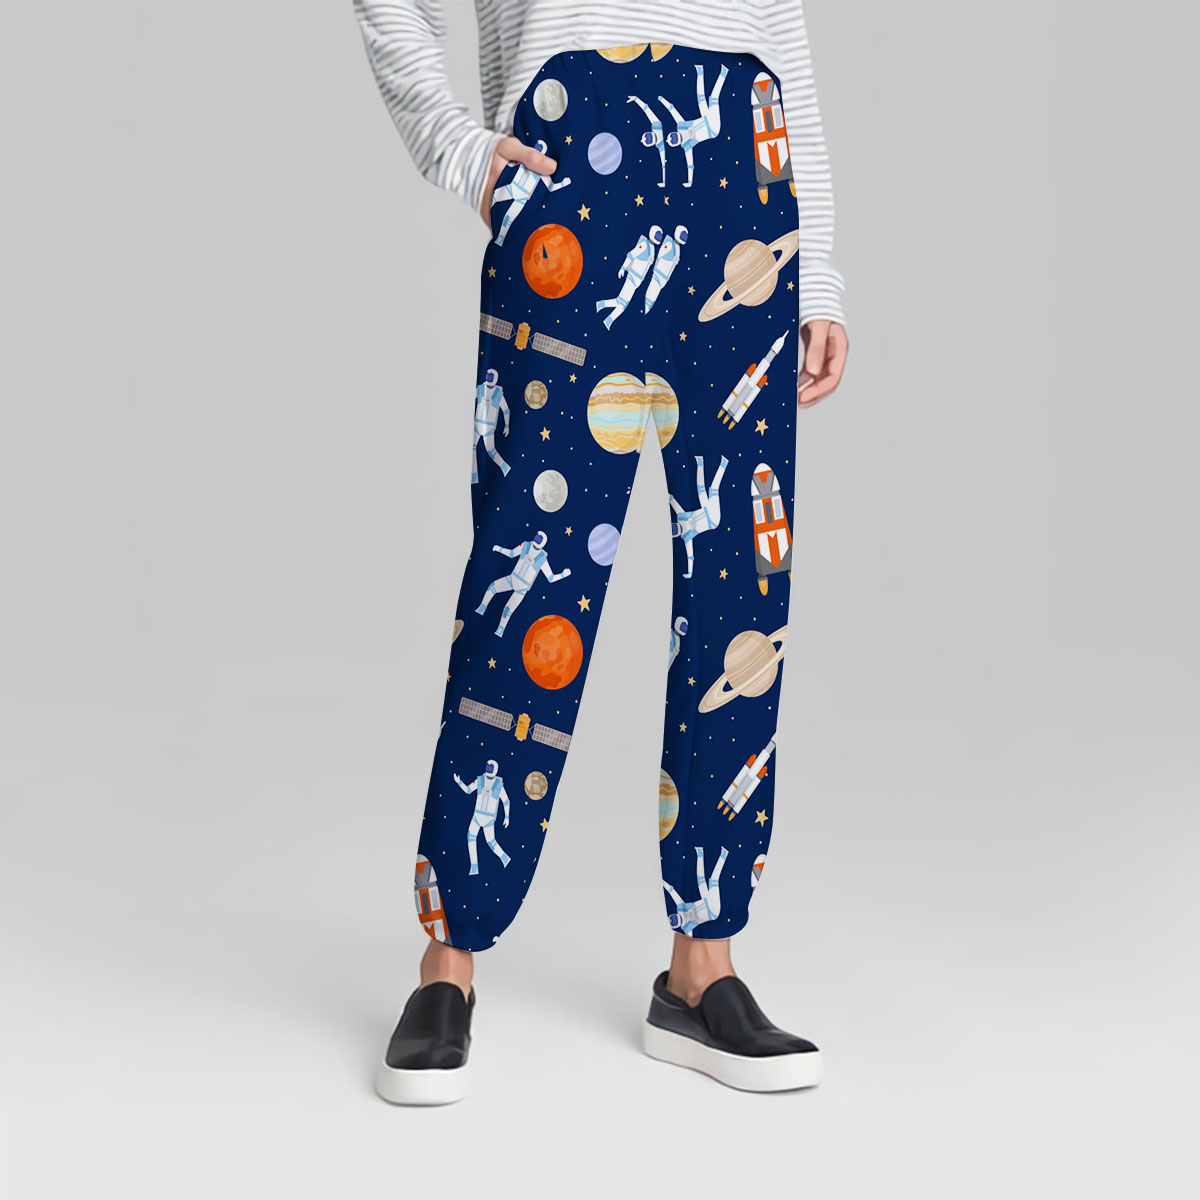 Outer Space Astronaut Sweatpant